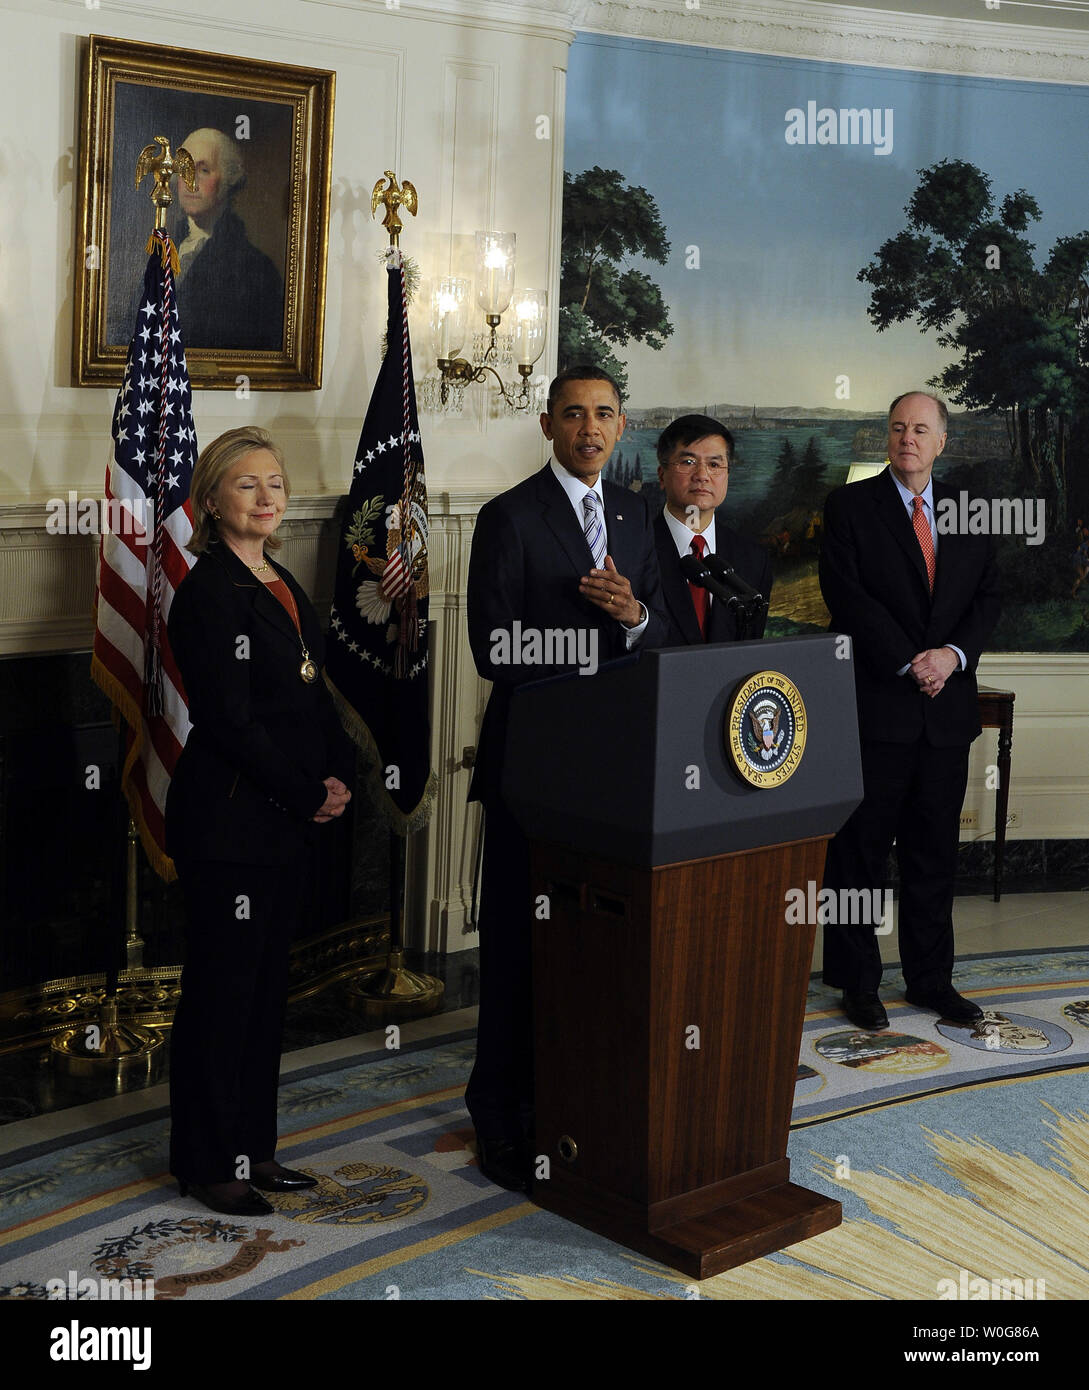 Secretary of State Hillary Rodham Clinton, U.S. President Barack Obama, Secretary of Commerce Gary F. Locke and National Security Advisor Tom Donilon (L to R) attend an announcement where Obama named Locke as his choice as Ambassador to China in the Diplomatic Reception Room of the White House in Washington on March 9, 2011.    UPI/Roger L. Wollenberg. Stock Photo